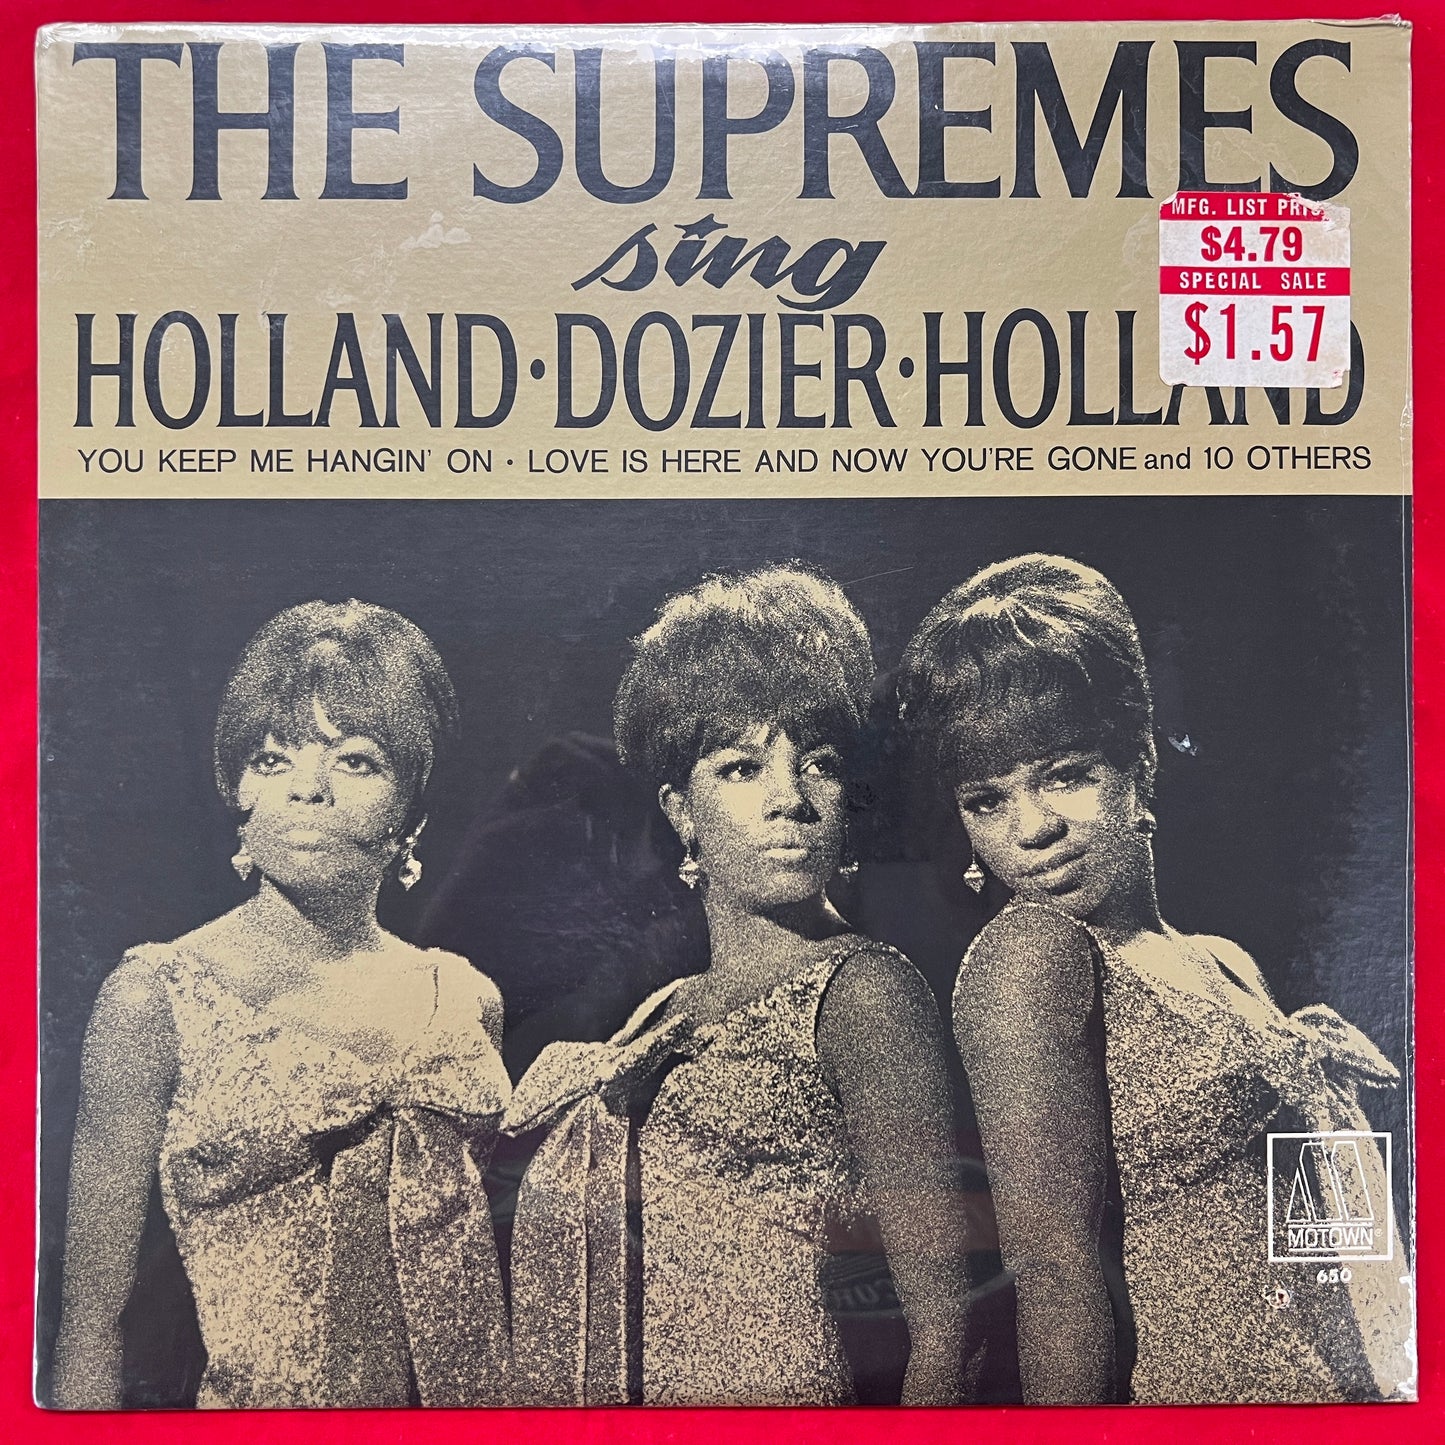 The Supremes - The Supremes Sing Holland-Dozier-Holland - LP